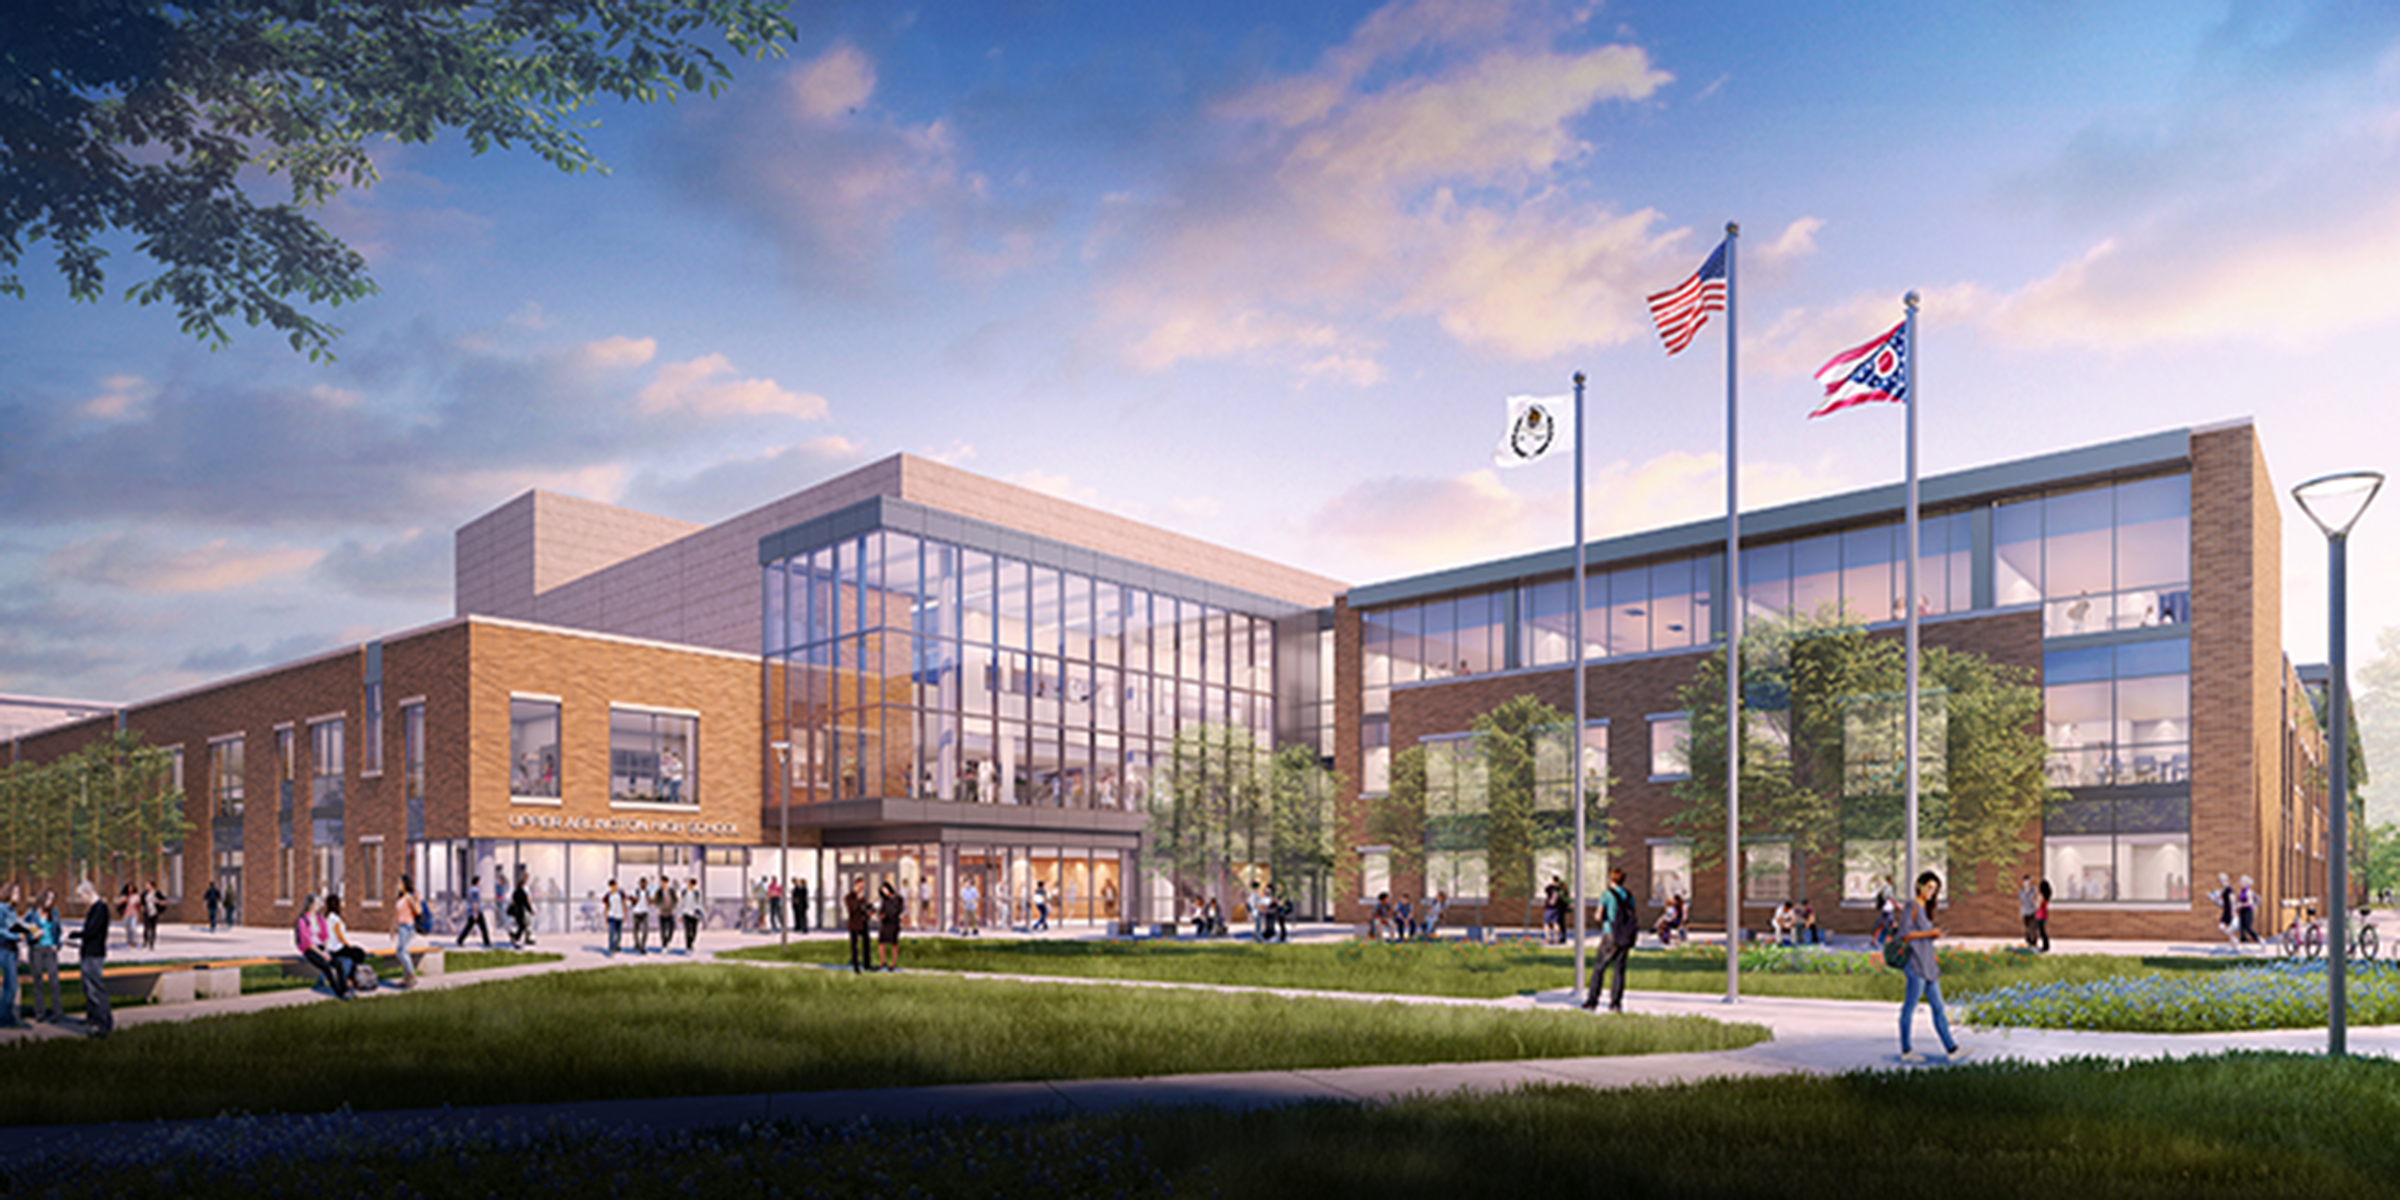 A rendering of the exterior of the new Upper Arlington High School